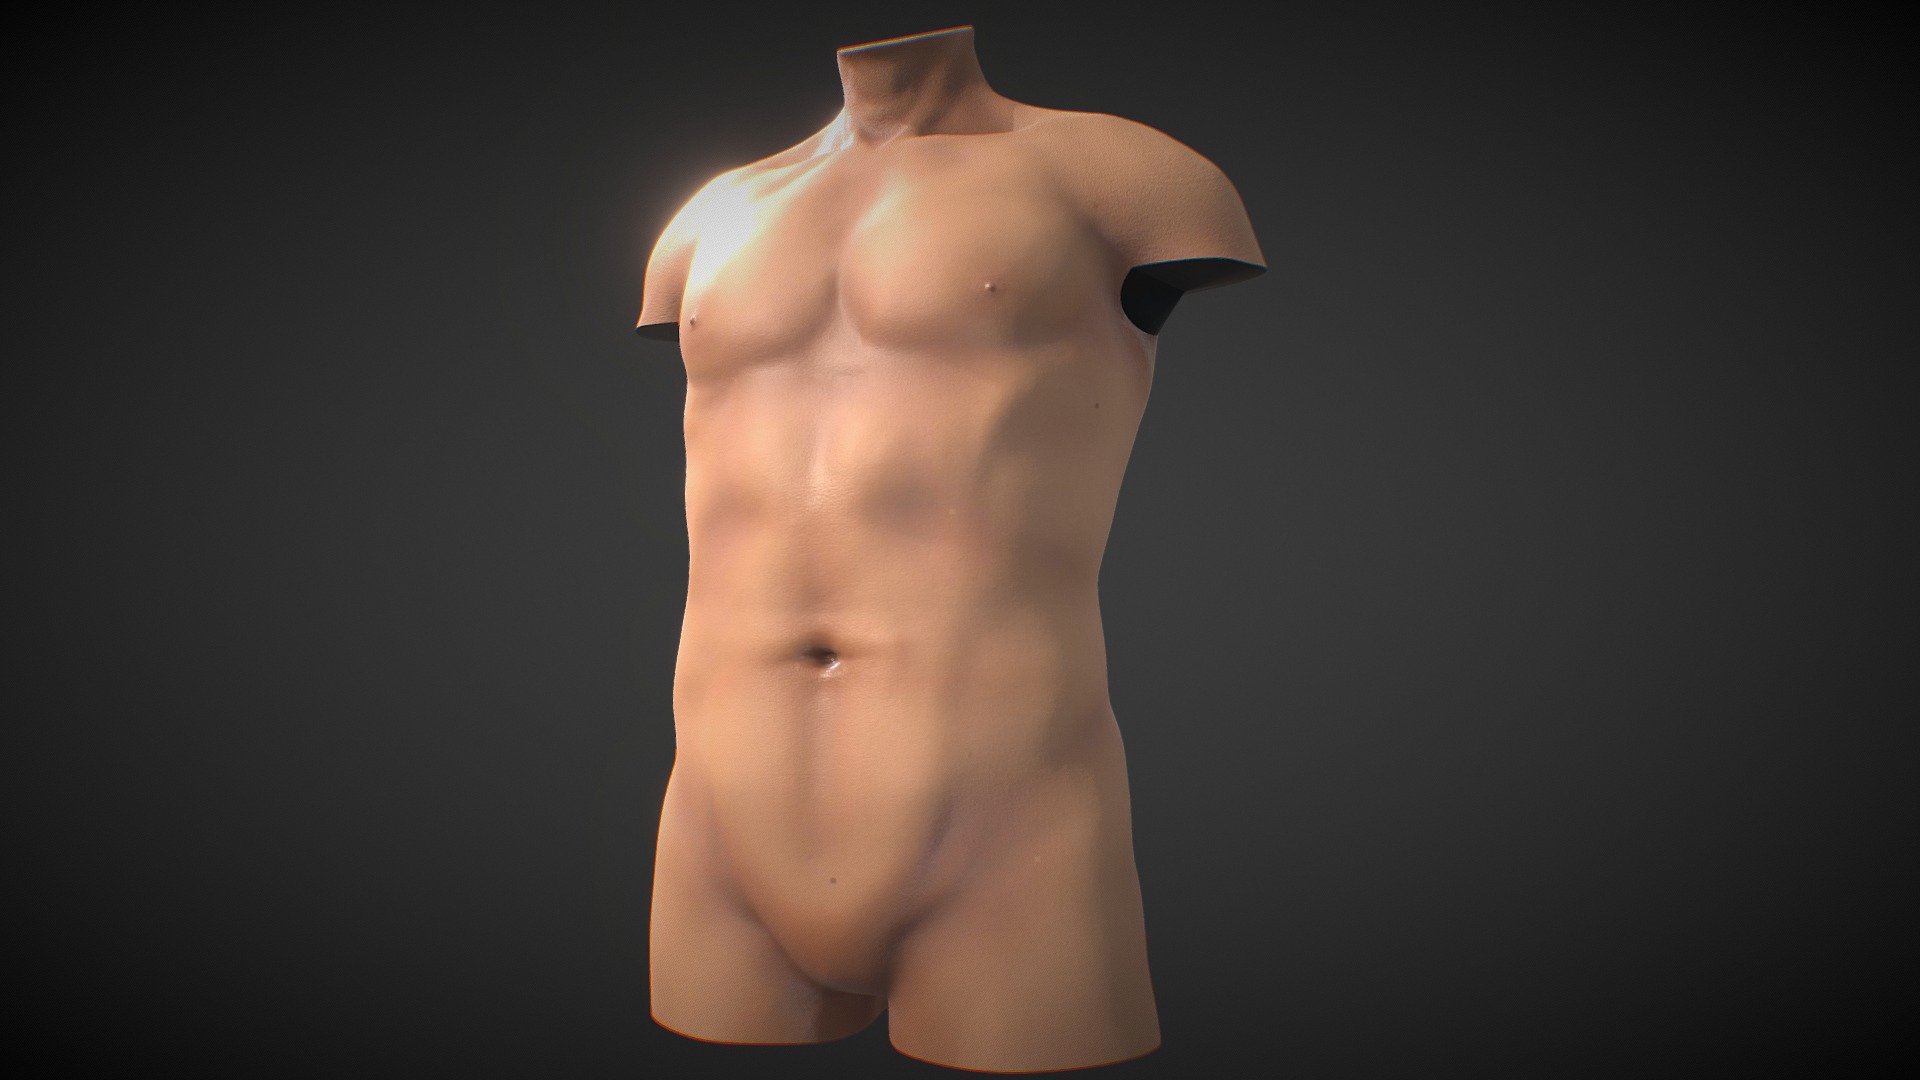 Full Male Body parts pack  is available here - https://skfb.ly/oAoRL

Female version - https://skfb.ly/o8XZR

A Fit male Anatomical Torso with Basic Textures.
Perfect for simulatiung tattoos and use in Procreate 3D

For Procreate Make sure to download and use the USDZ file if you want to automatically load the model with color texture, otherwise use the OBJ - Fit Male Anatomy - Torso base mesh - Buy Royalty Free 3D model by Deftroy 3d model